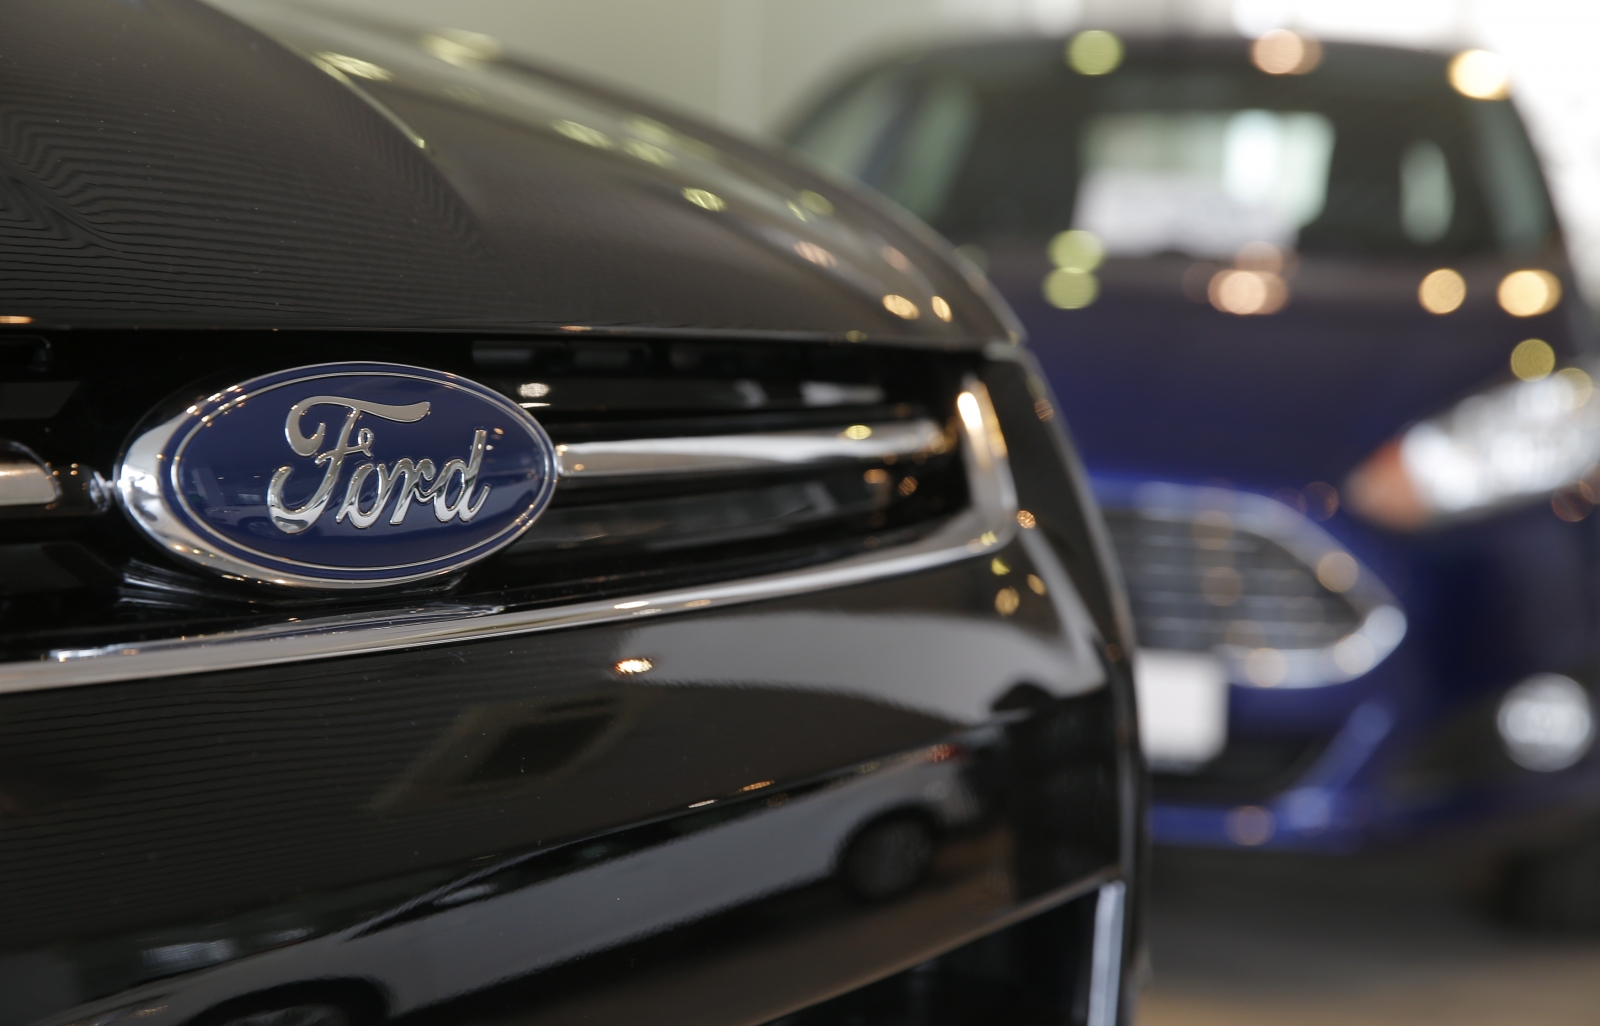 Ford recalls more than half a million cars over fears of engine fires and faulty doors